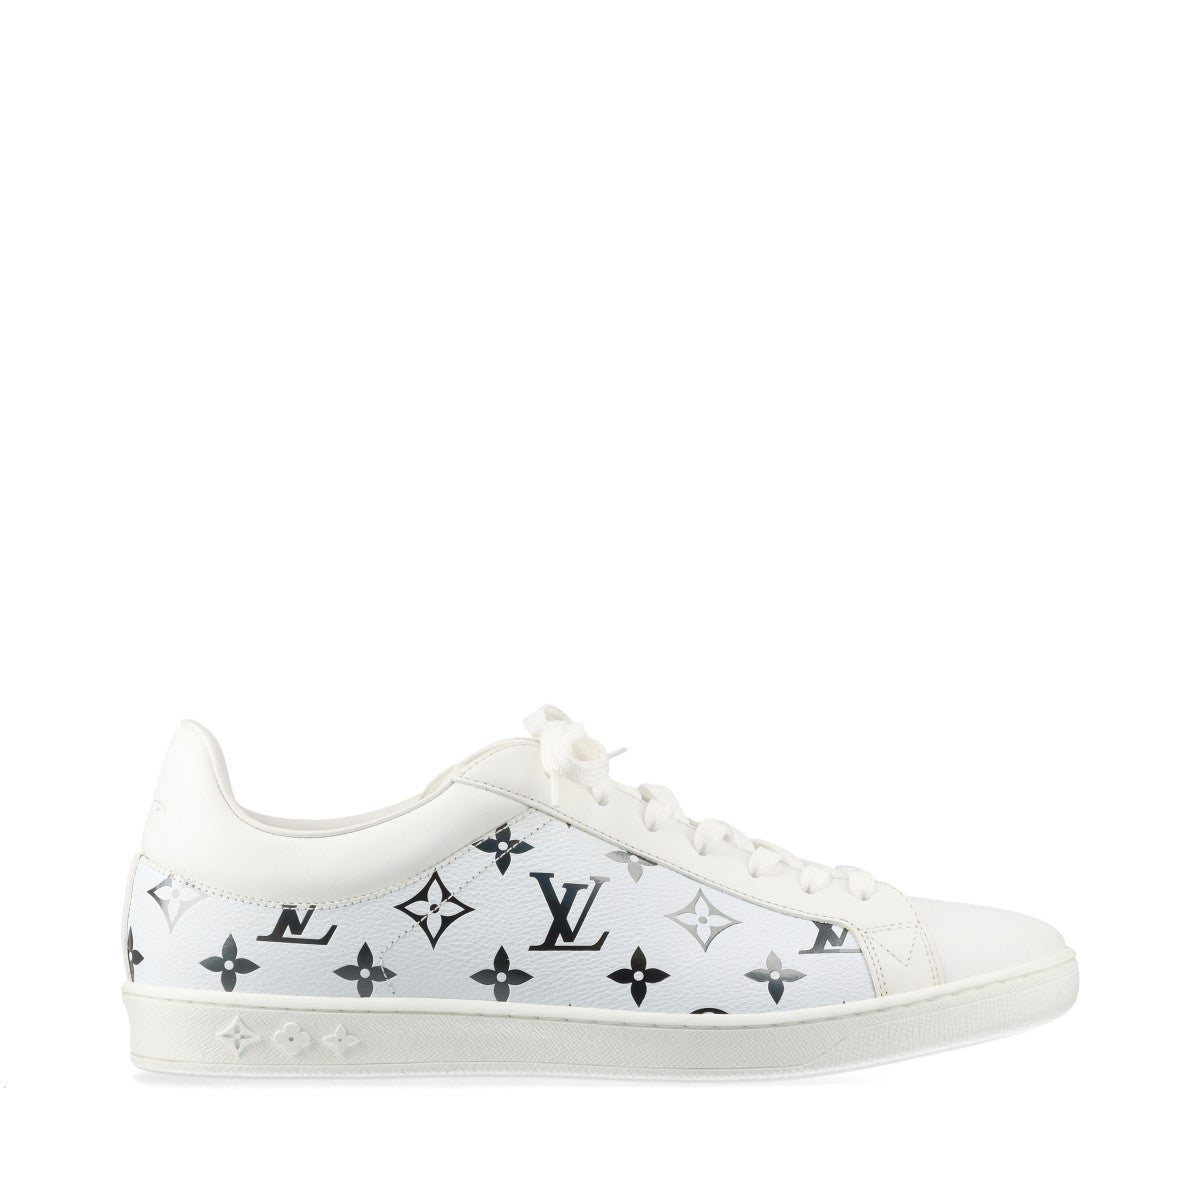 Louis Vuitton Luxembourg line 20 years Leather Sneakers 8 Men's Black × White MS1210 Monogram Aurora color